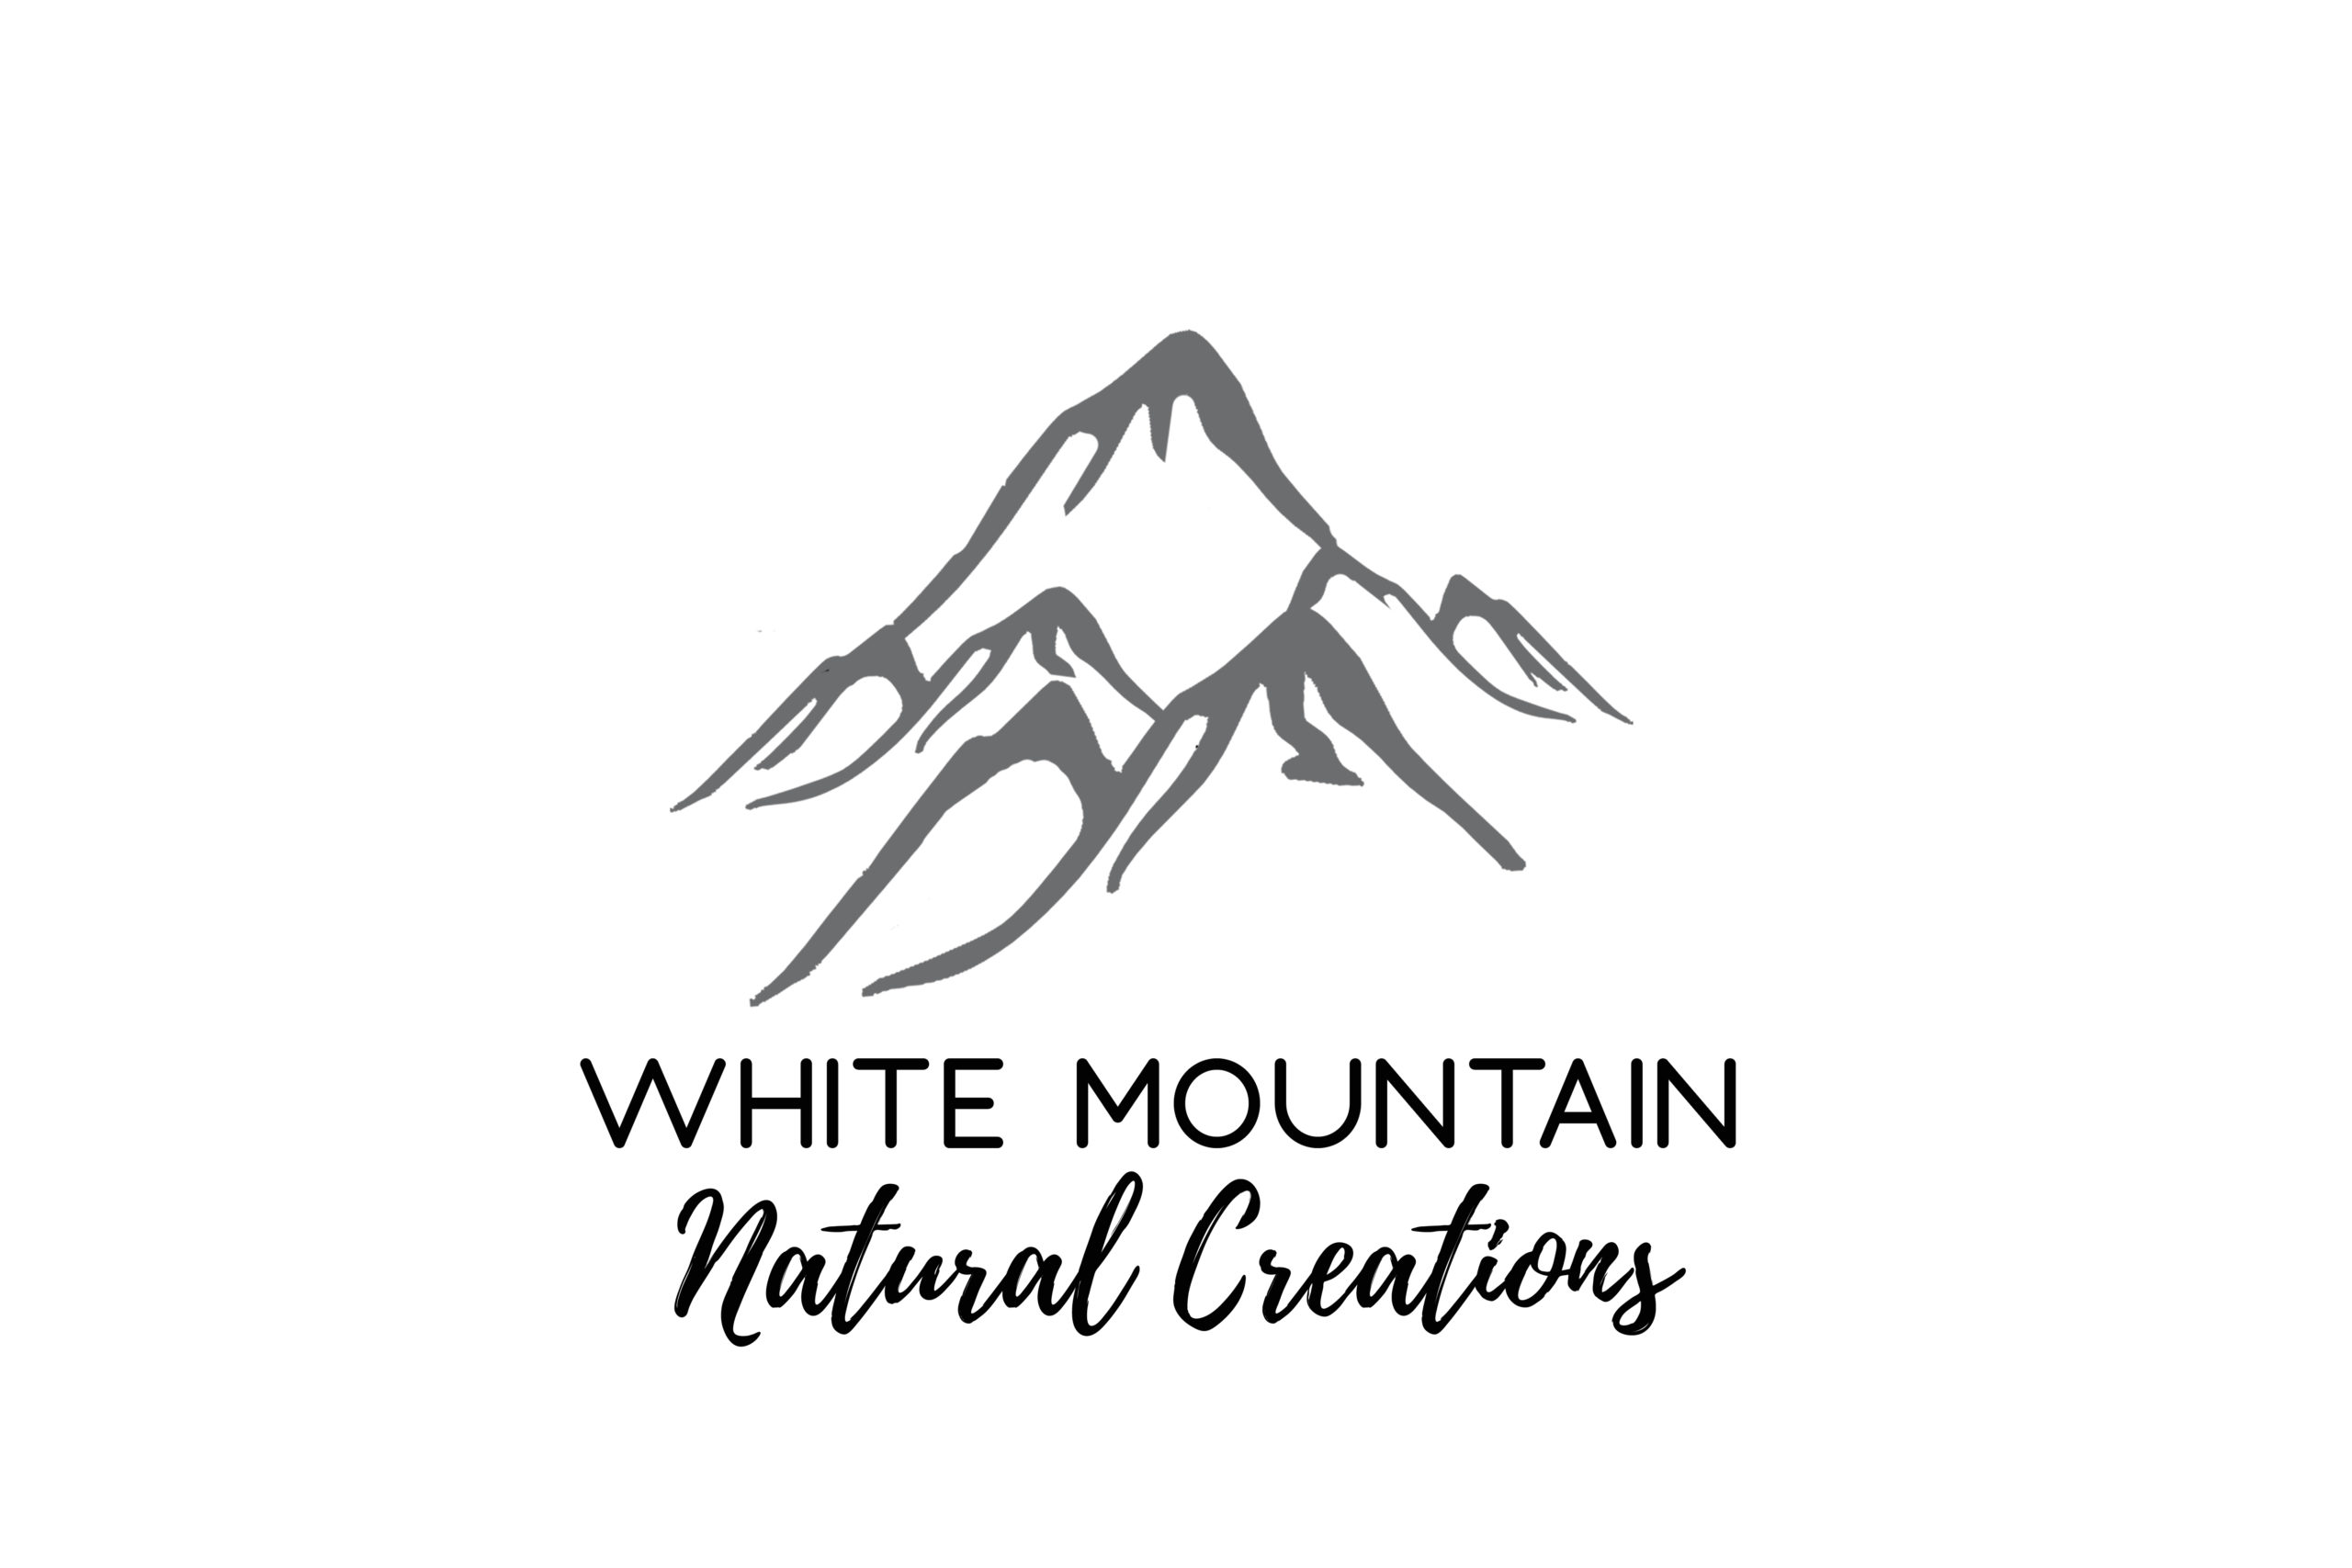 White Mountain Natural Creations